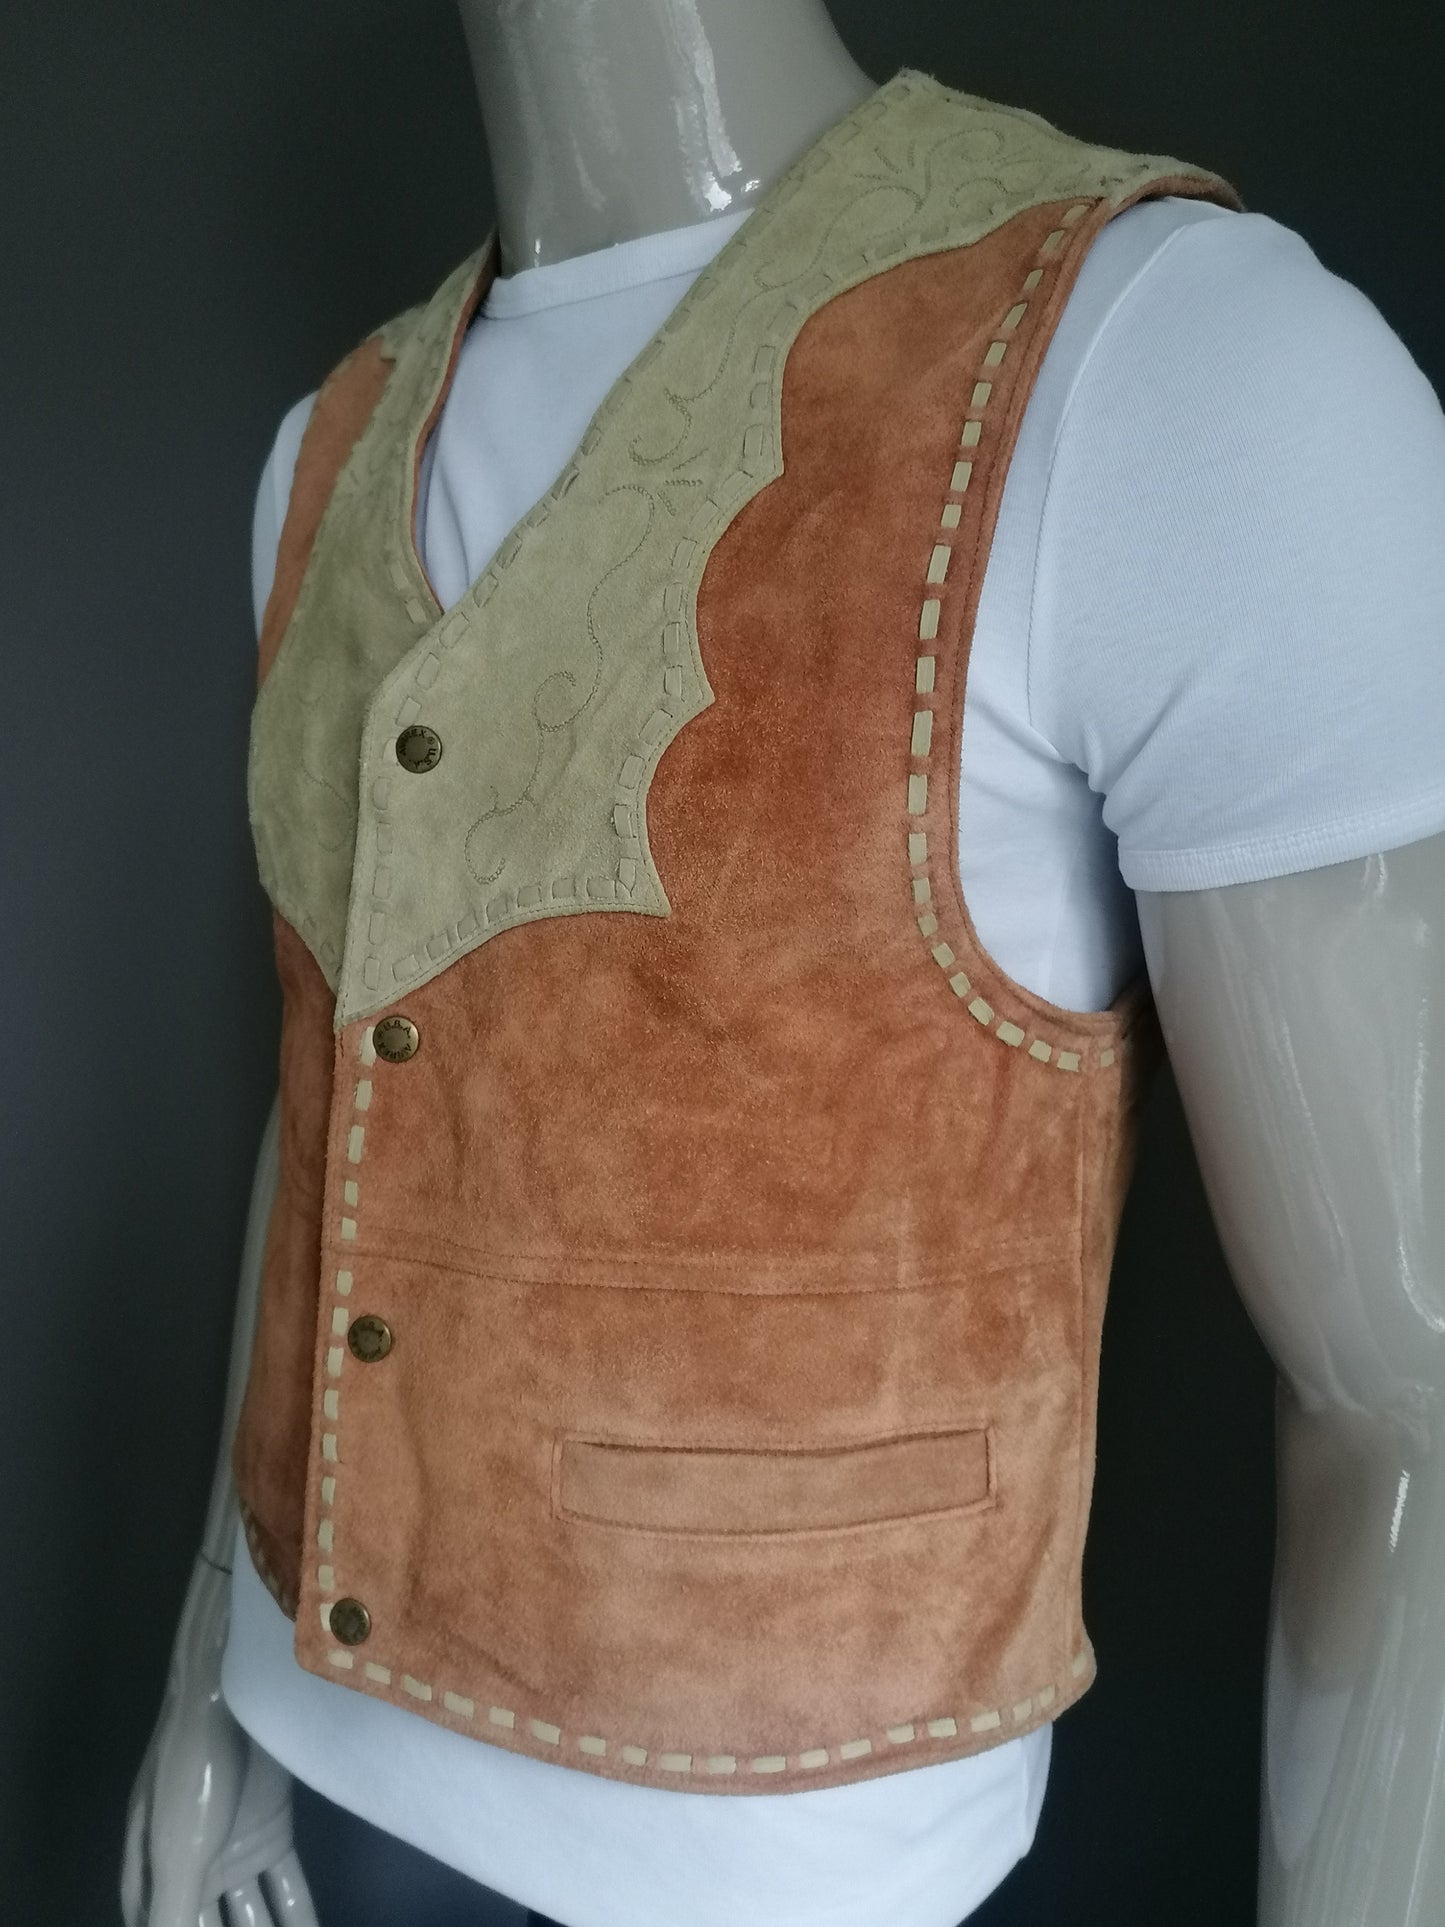 Avirex suede leather waistcoat with press studs. Brown beige thick leather with stitched accent. Size M.